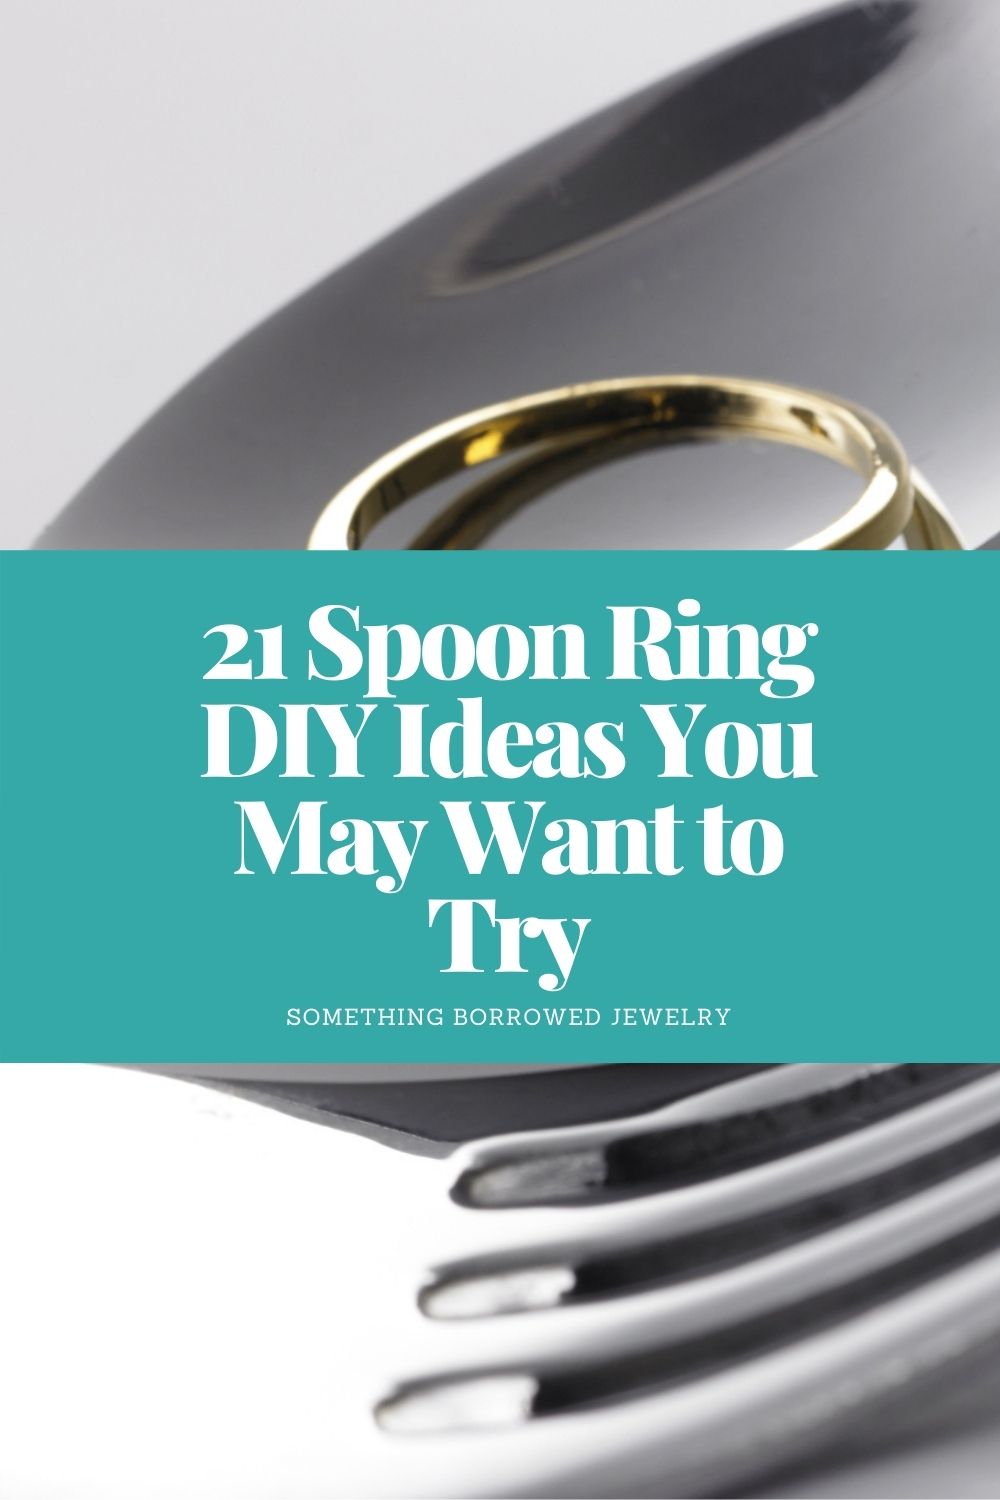 21 Spoon Ring DIY Ideas You May Want to Try pin